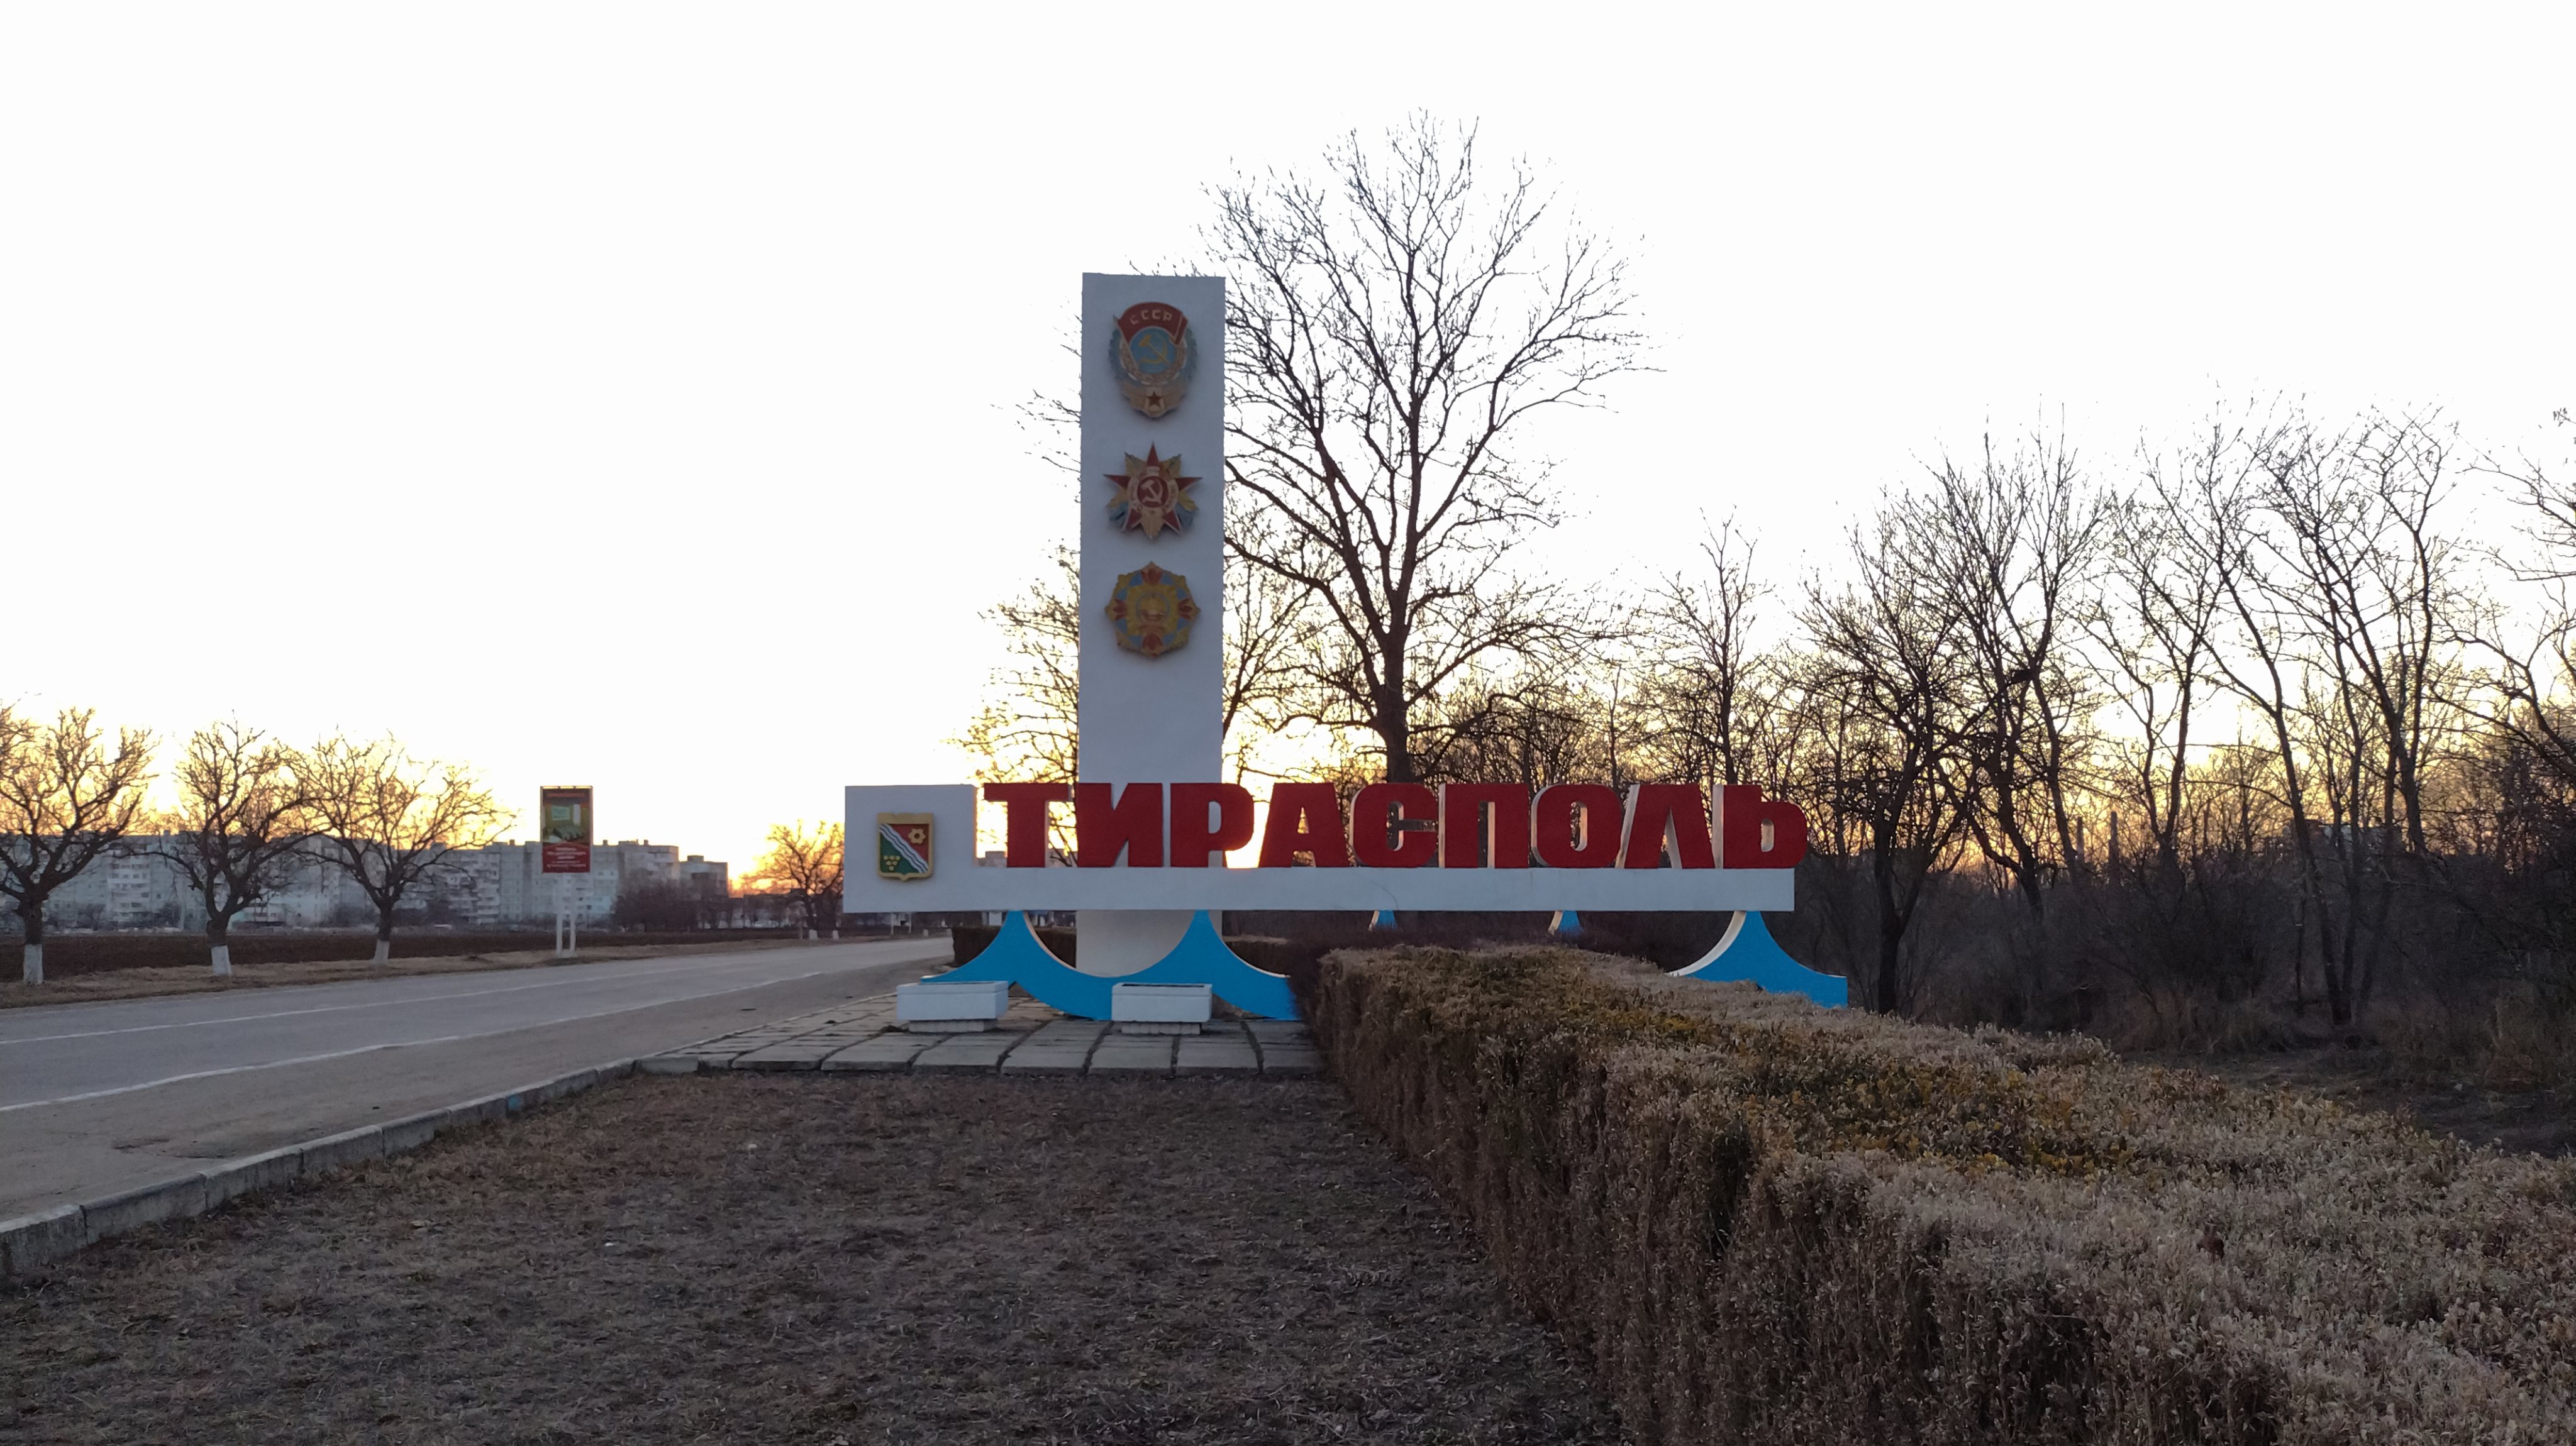 Transnistria, An Independent State